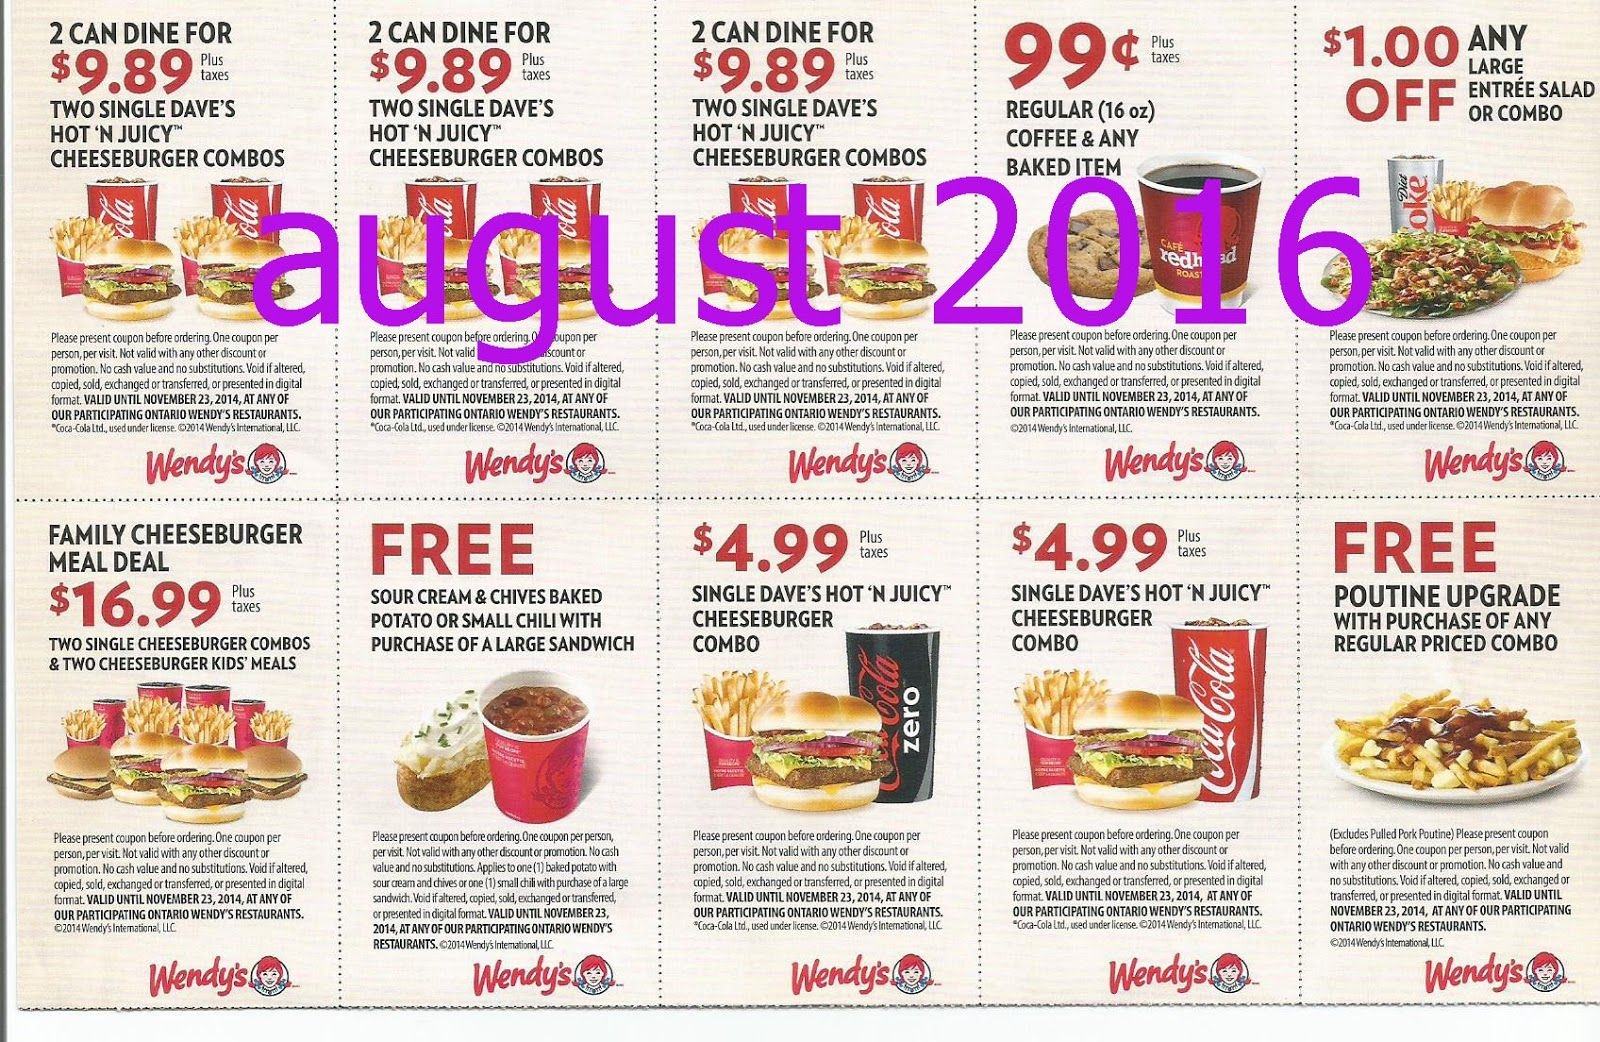 Free Printable Coupons: Wendys Coupons | Fast Food Coupons | Wendys - Free Printable Coupons 2014